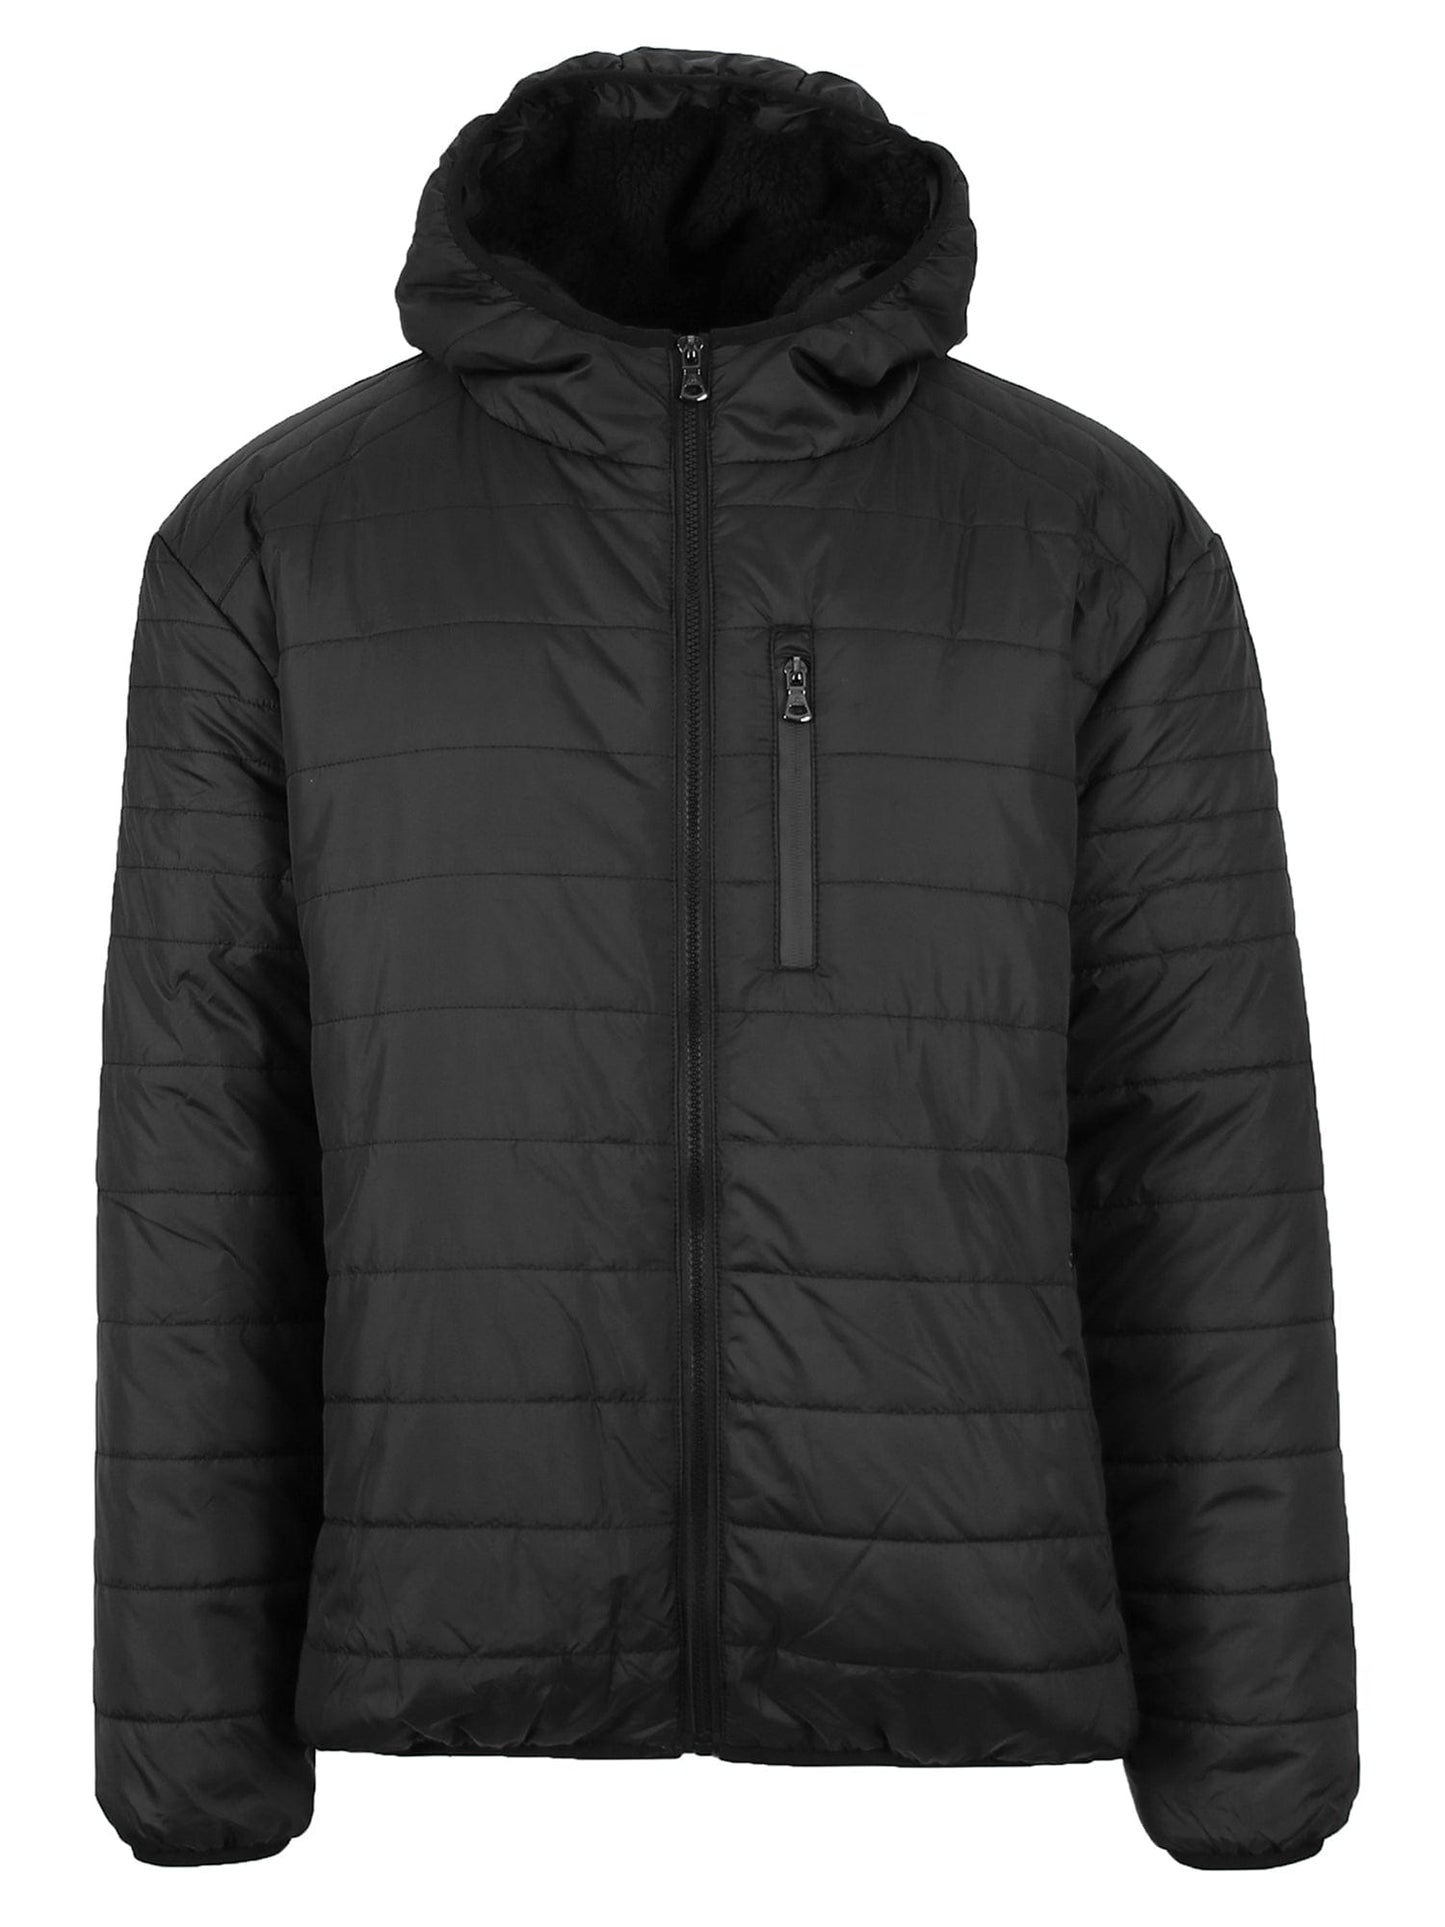 Men's Sherpa Lined Hooded Puffer Jacket - GalaxybyHarvic